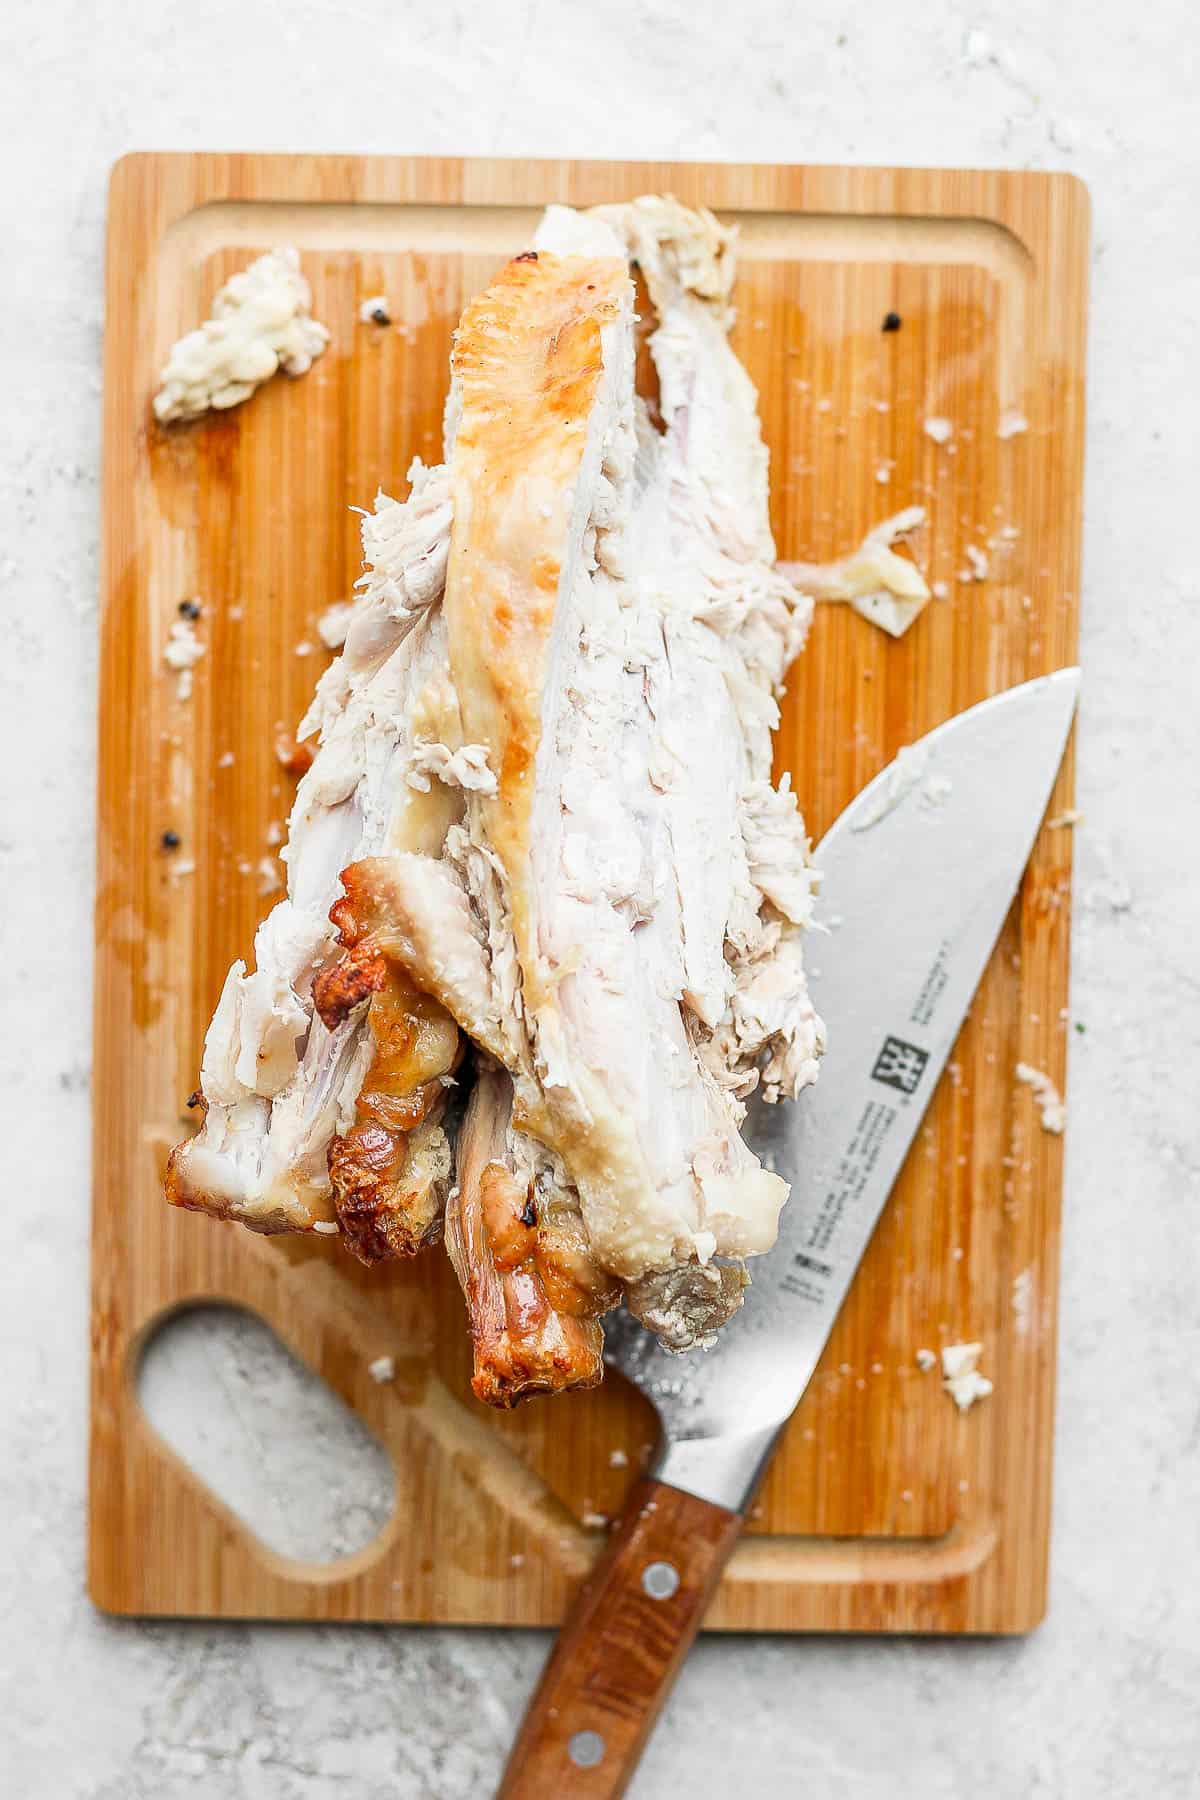 The remaining turkey carcass or bones on the cutting board with the knife.